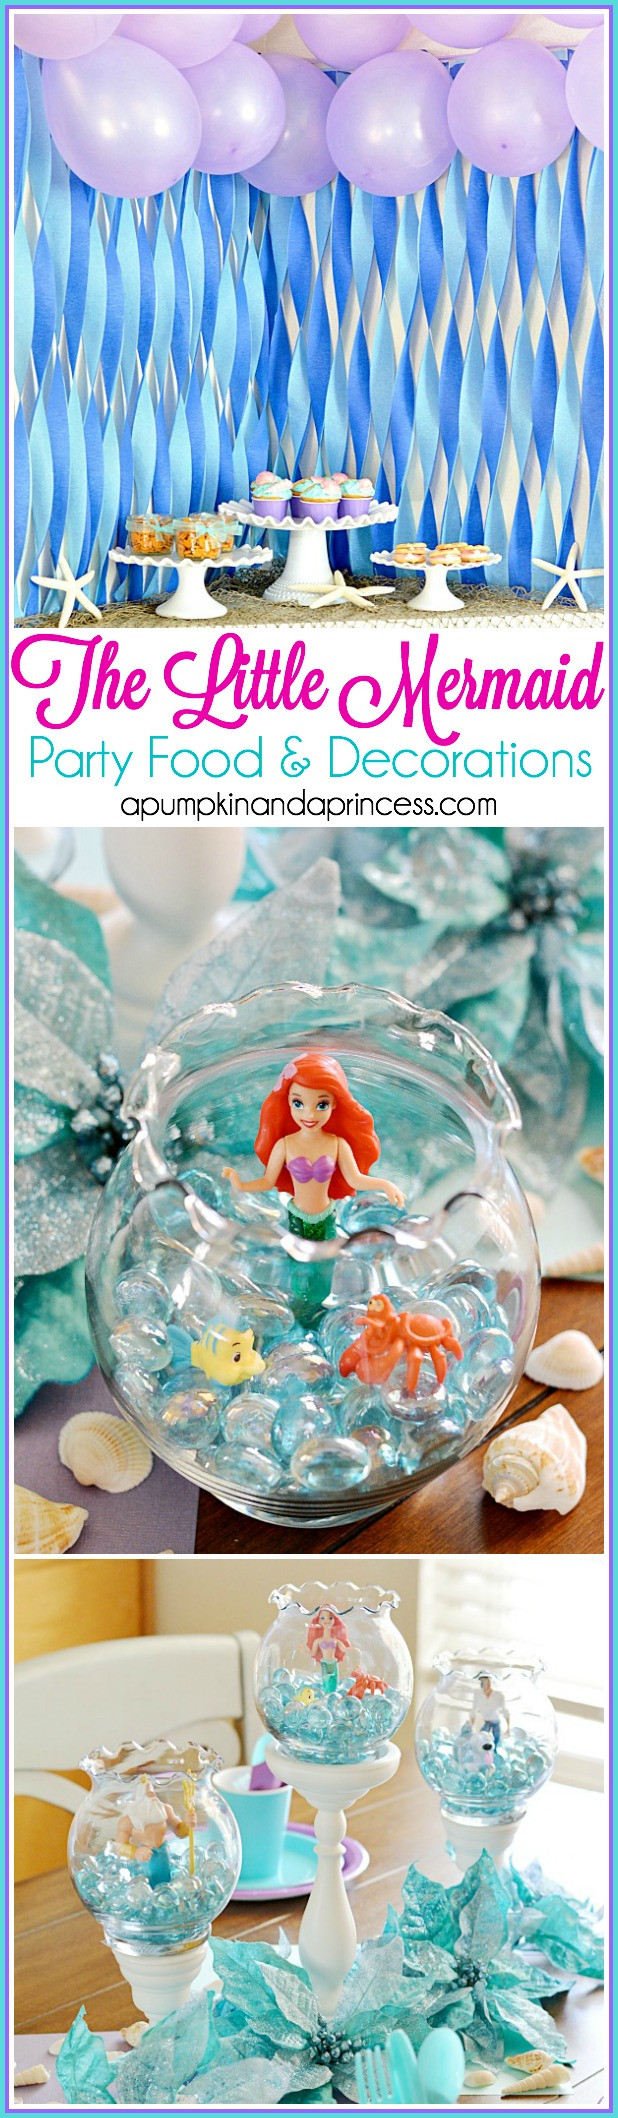 Little Mermaid Party Ideas
 The Little Mermaid Party A Pumpkin And A Princess